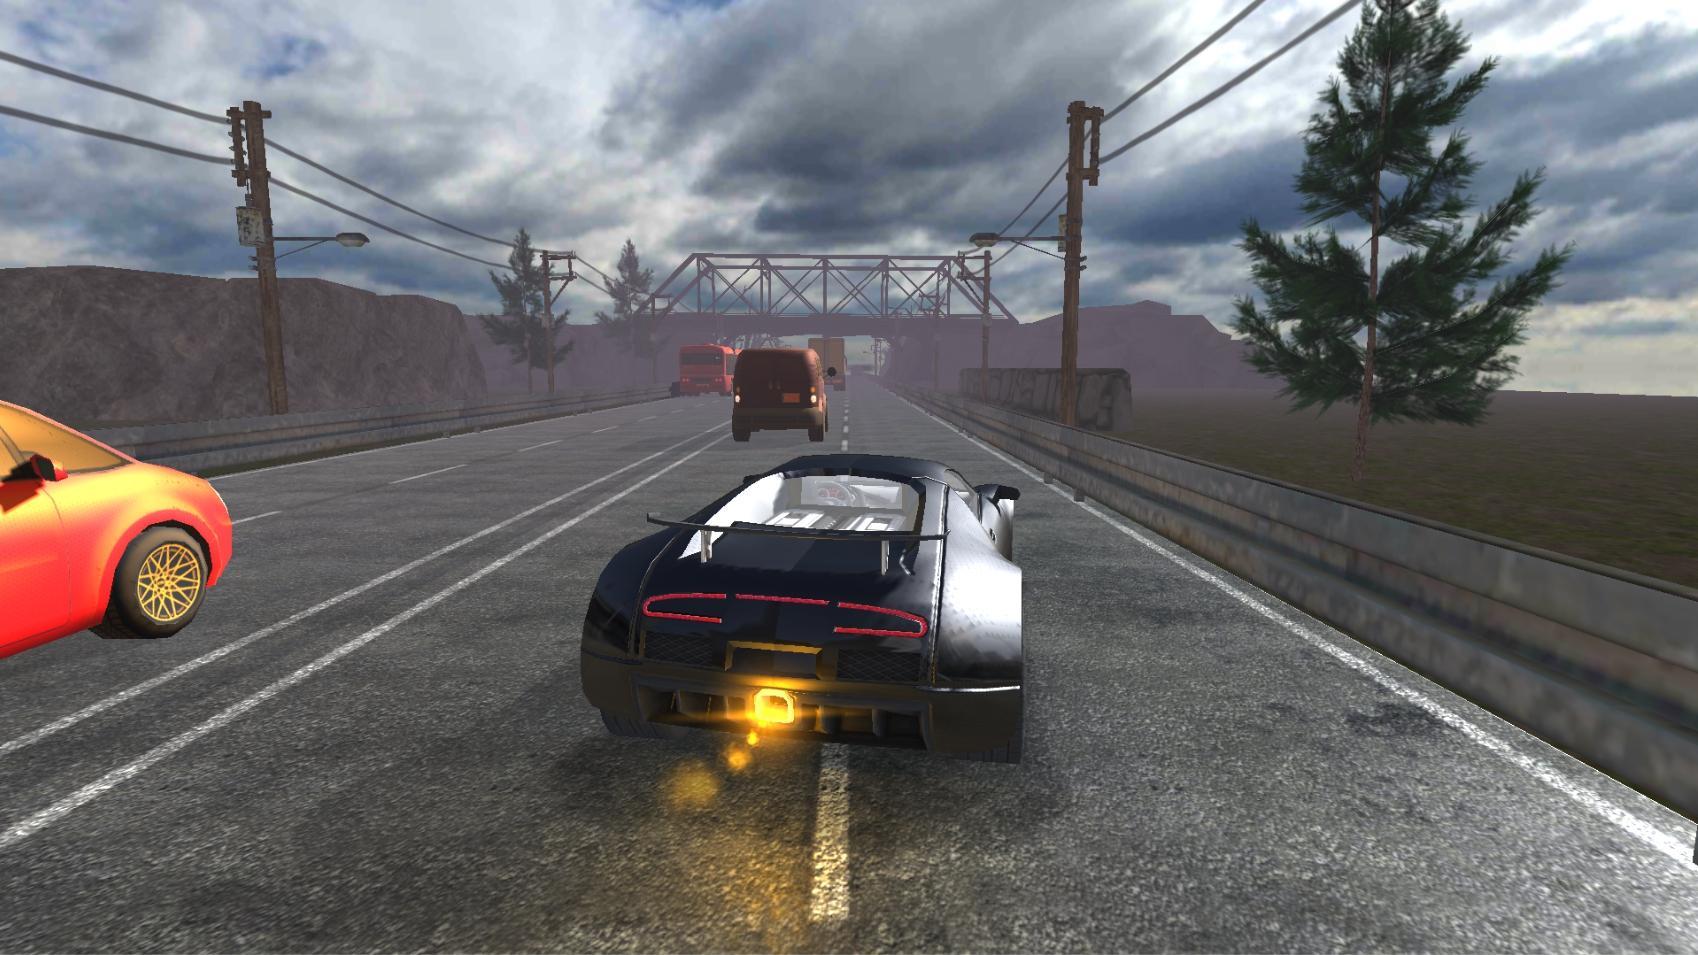 Free Race: Car Racing game for Android - APK Download